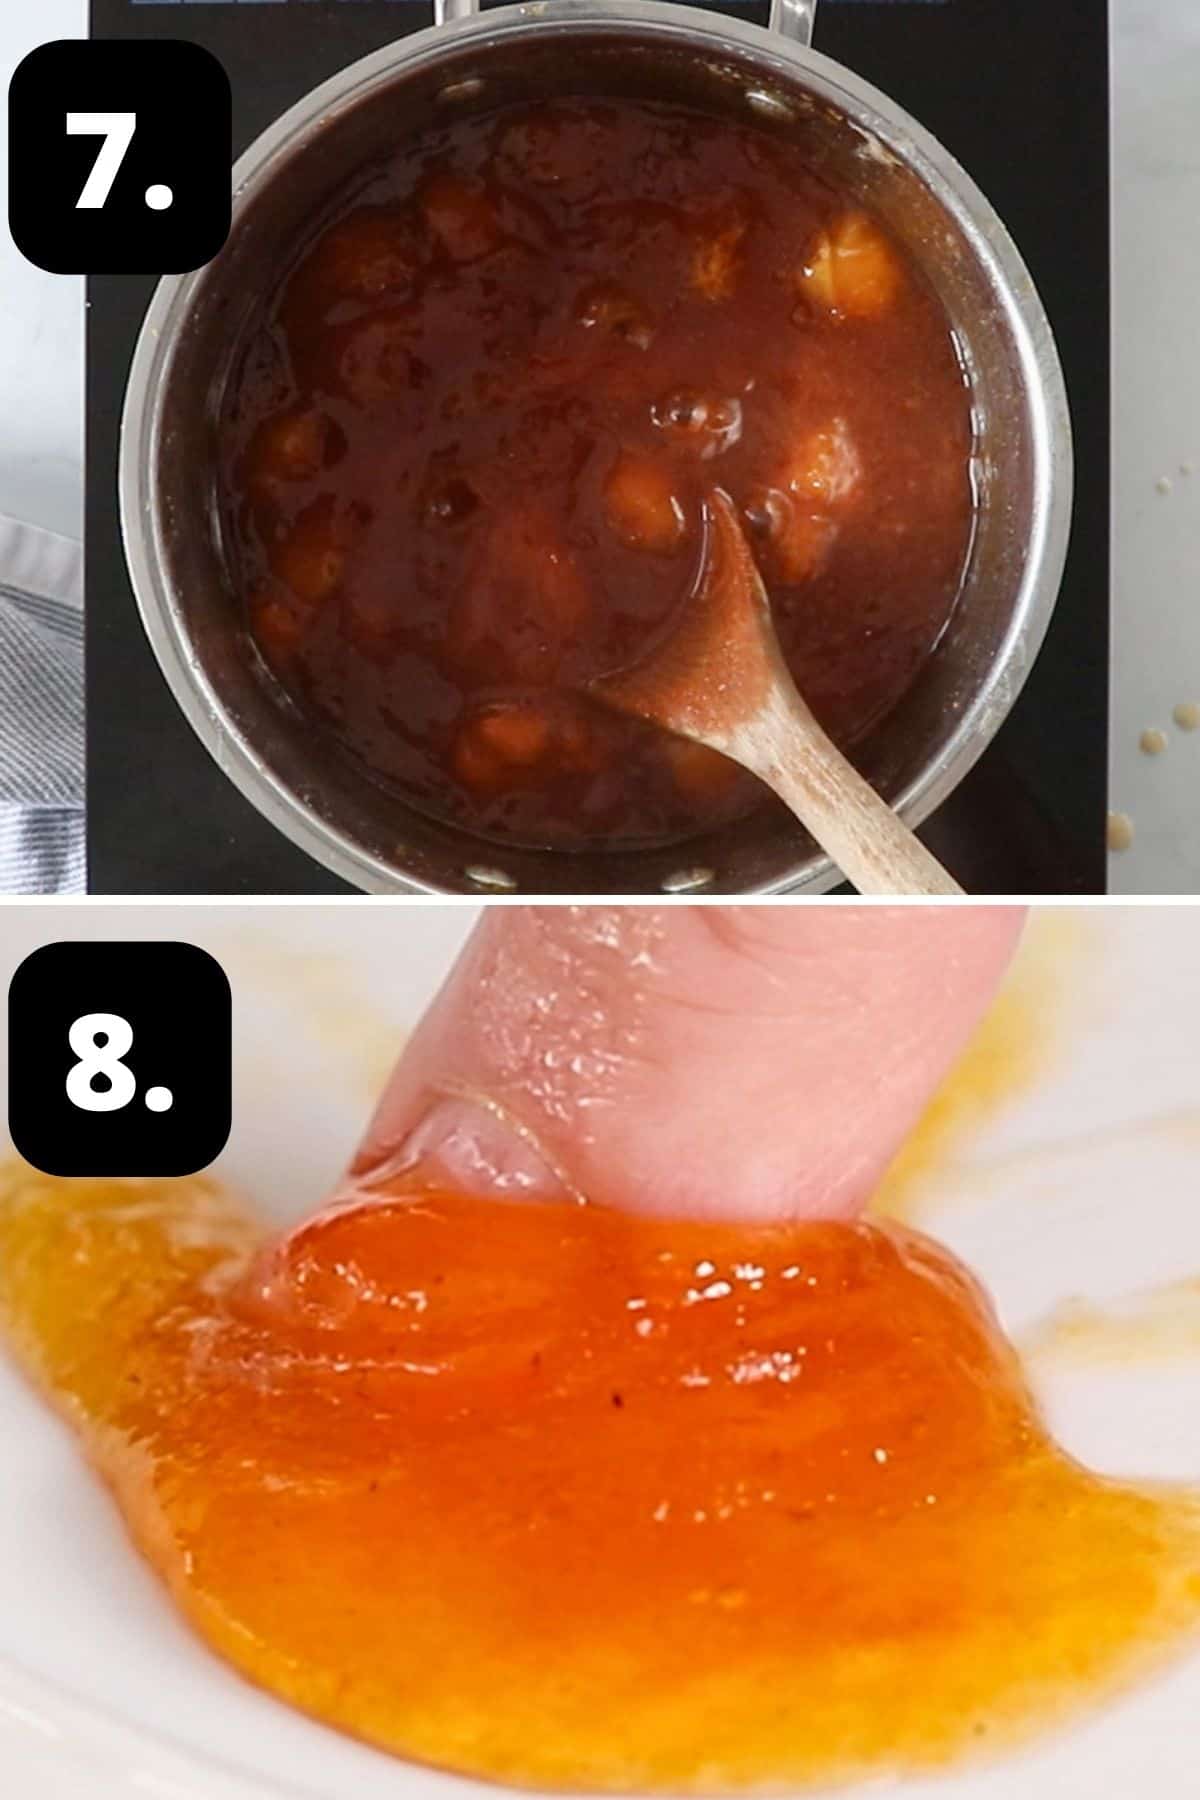 Steps 7-8 of preparing this recipe - the cooked jam and doing the wrinkle test to ensure it has reached setting point.